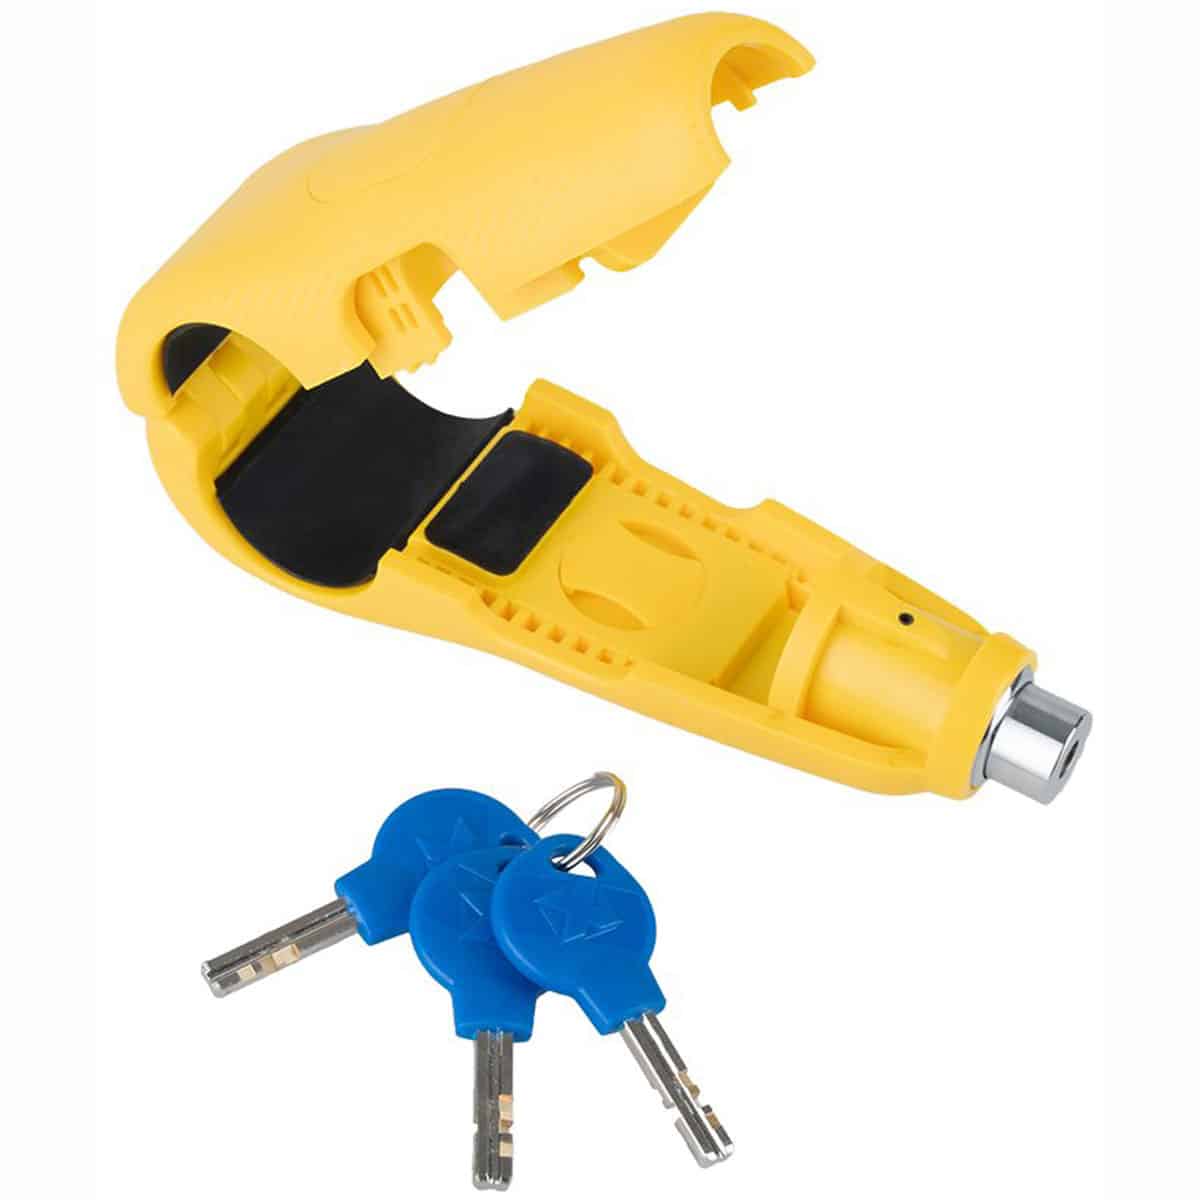 The Oxford LeverLock Alarm Motorcycle Throttle and Brake Security Lock is an easy-to-use, highly visible and easy to install theft deterrent for all scooters, motorcycles and ATVs